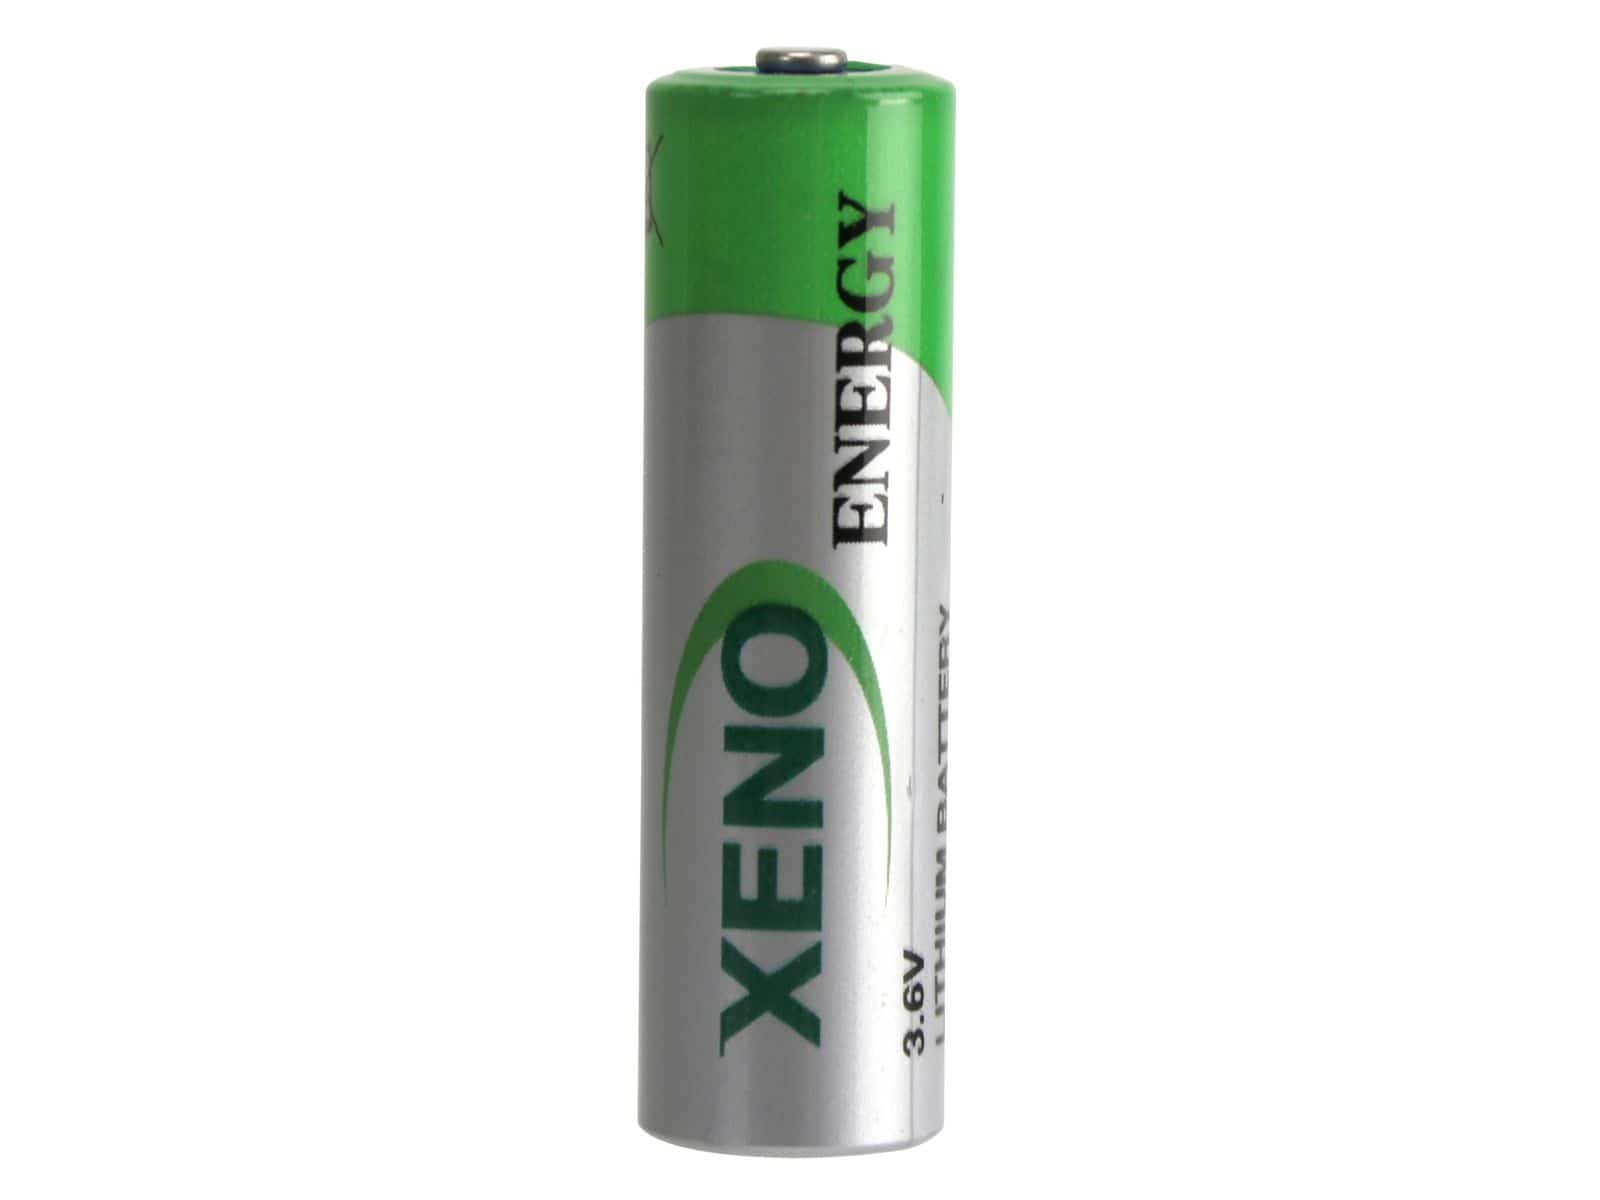 Image of XENO, Lithium-Batterie, XL-060F, 3,6V/2,4Ah, Knopfanschluss